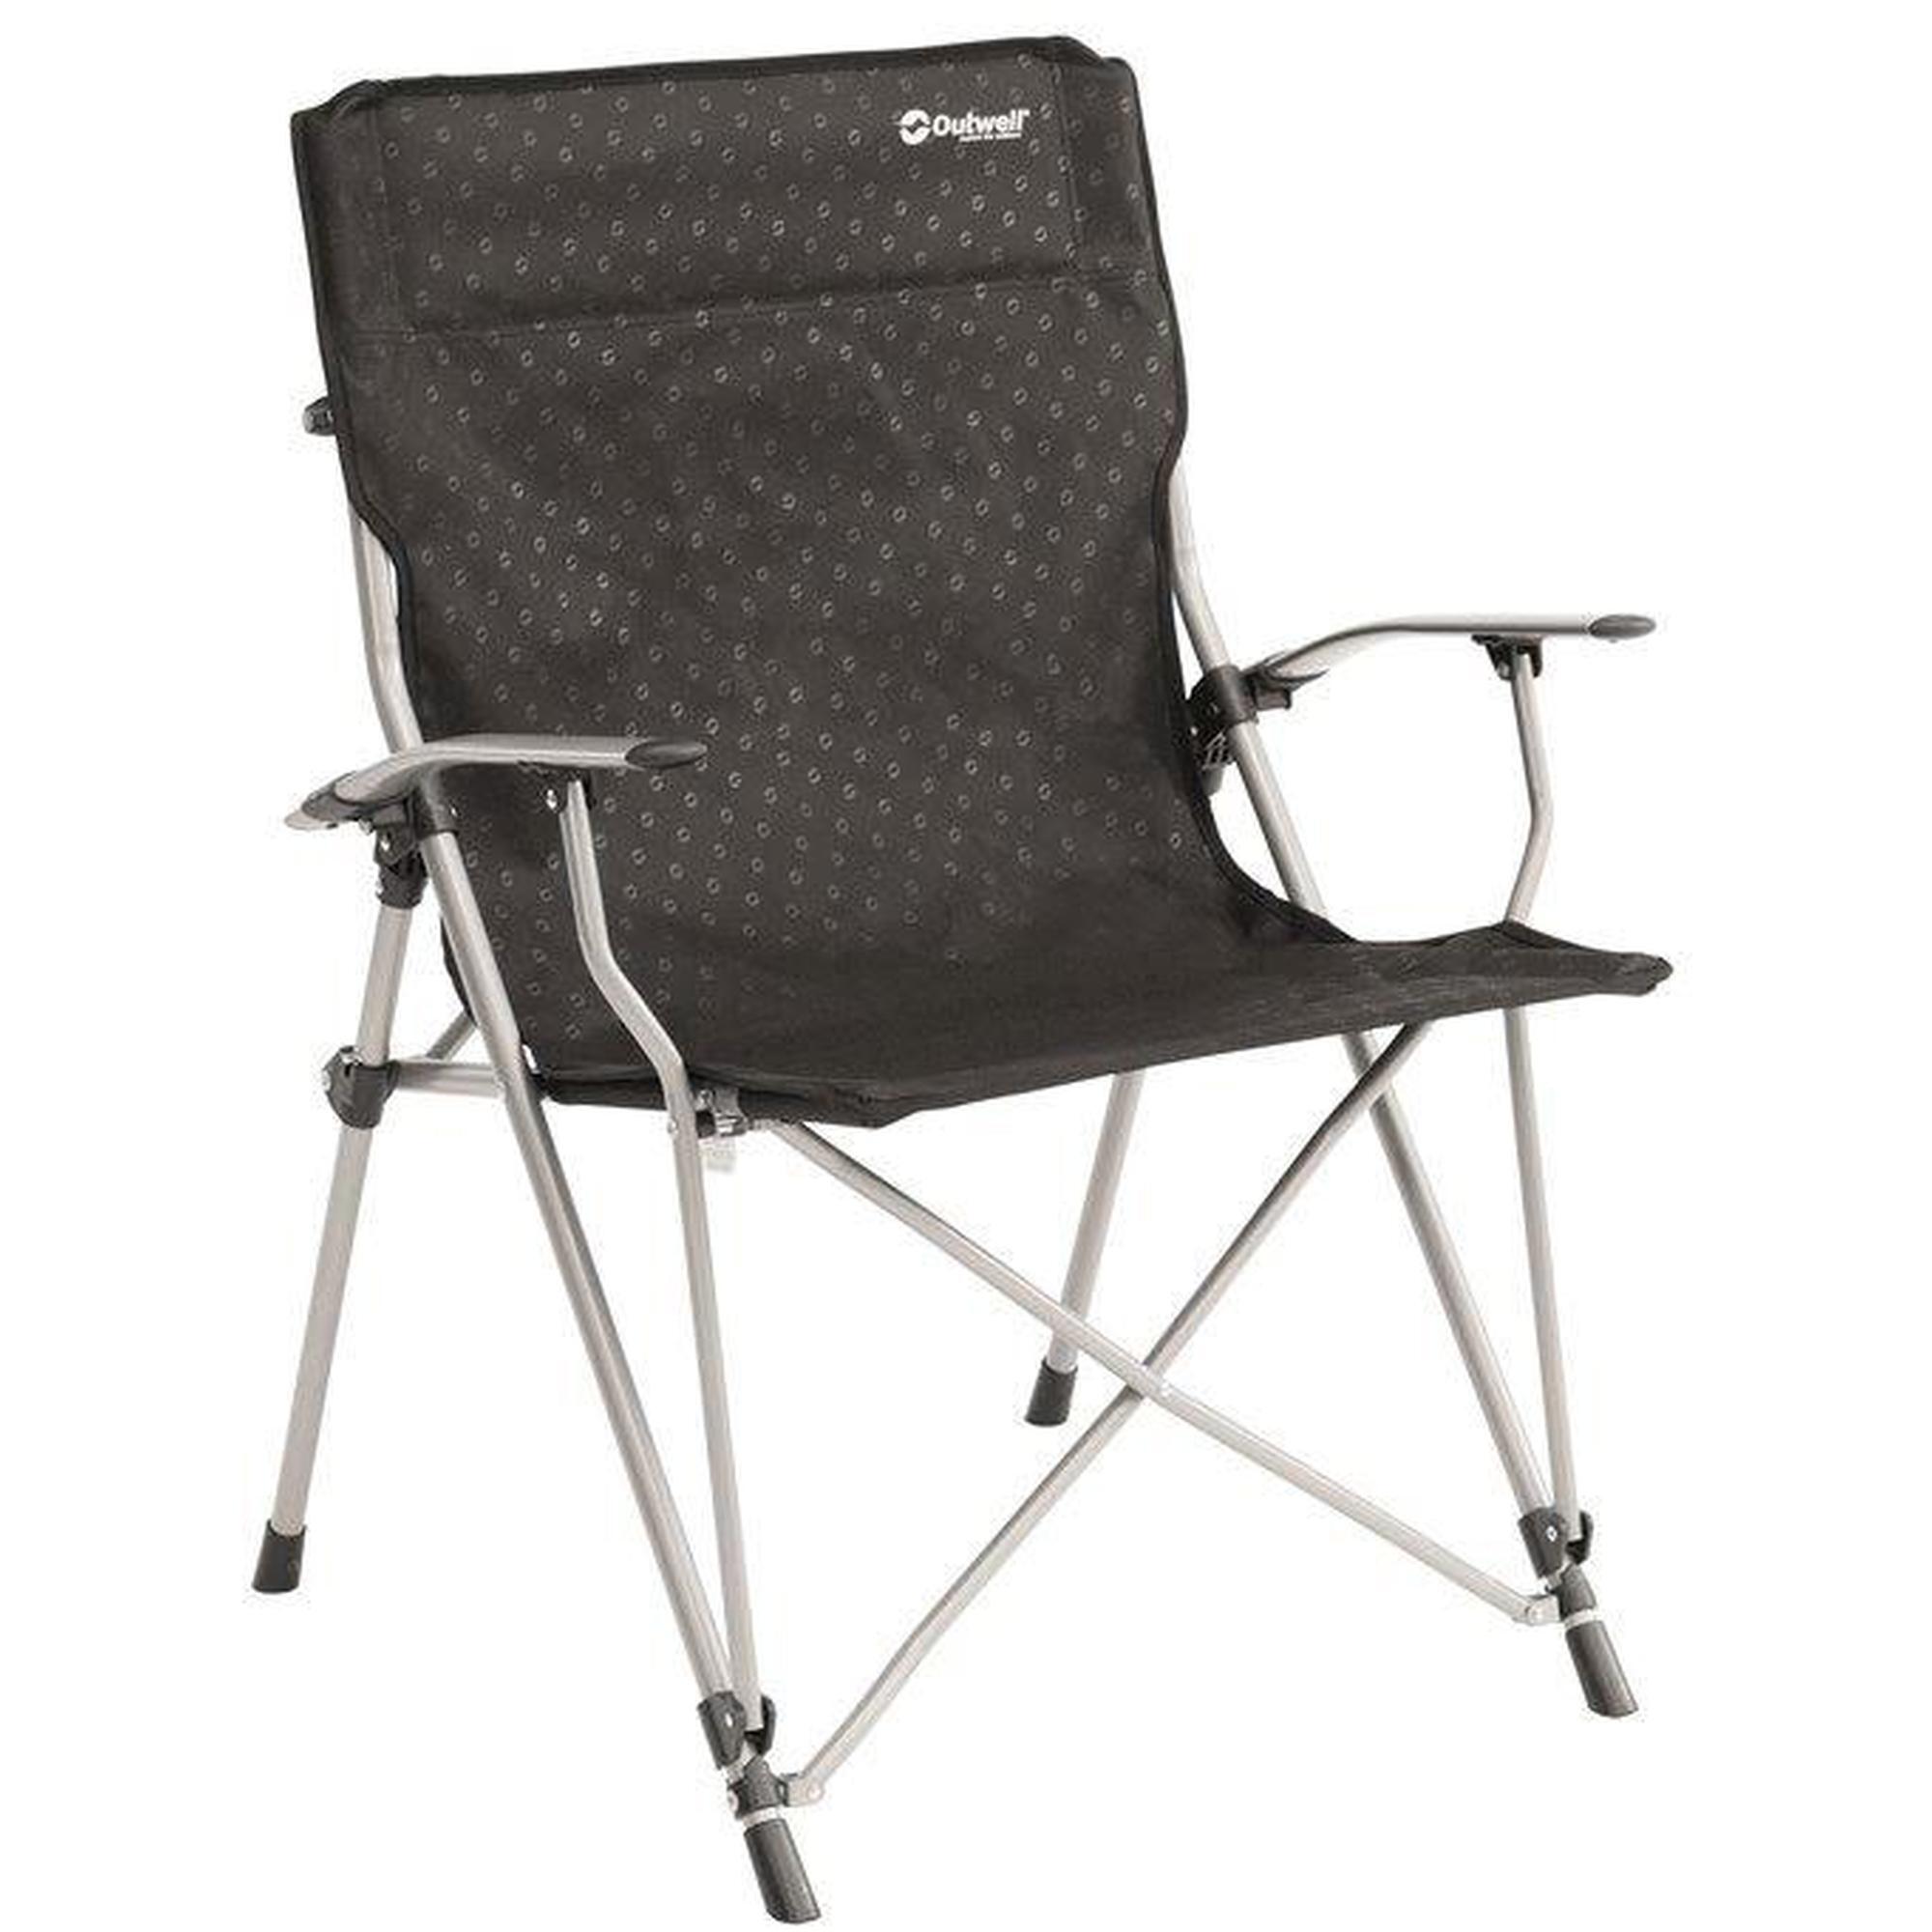 OUTWELL Outwell Folding Camping Chair Goya XL Black